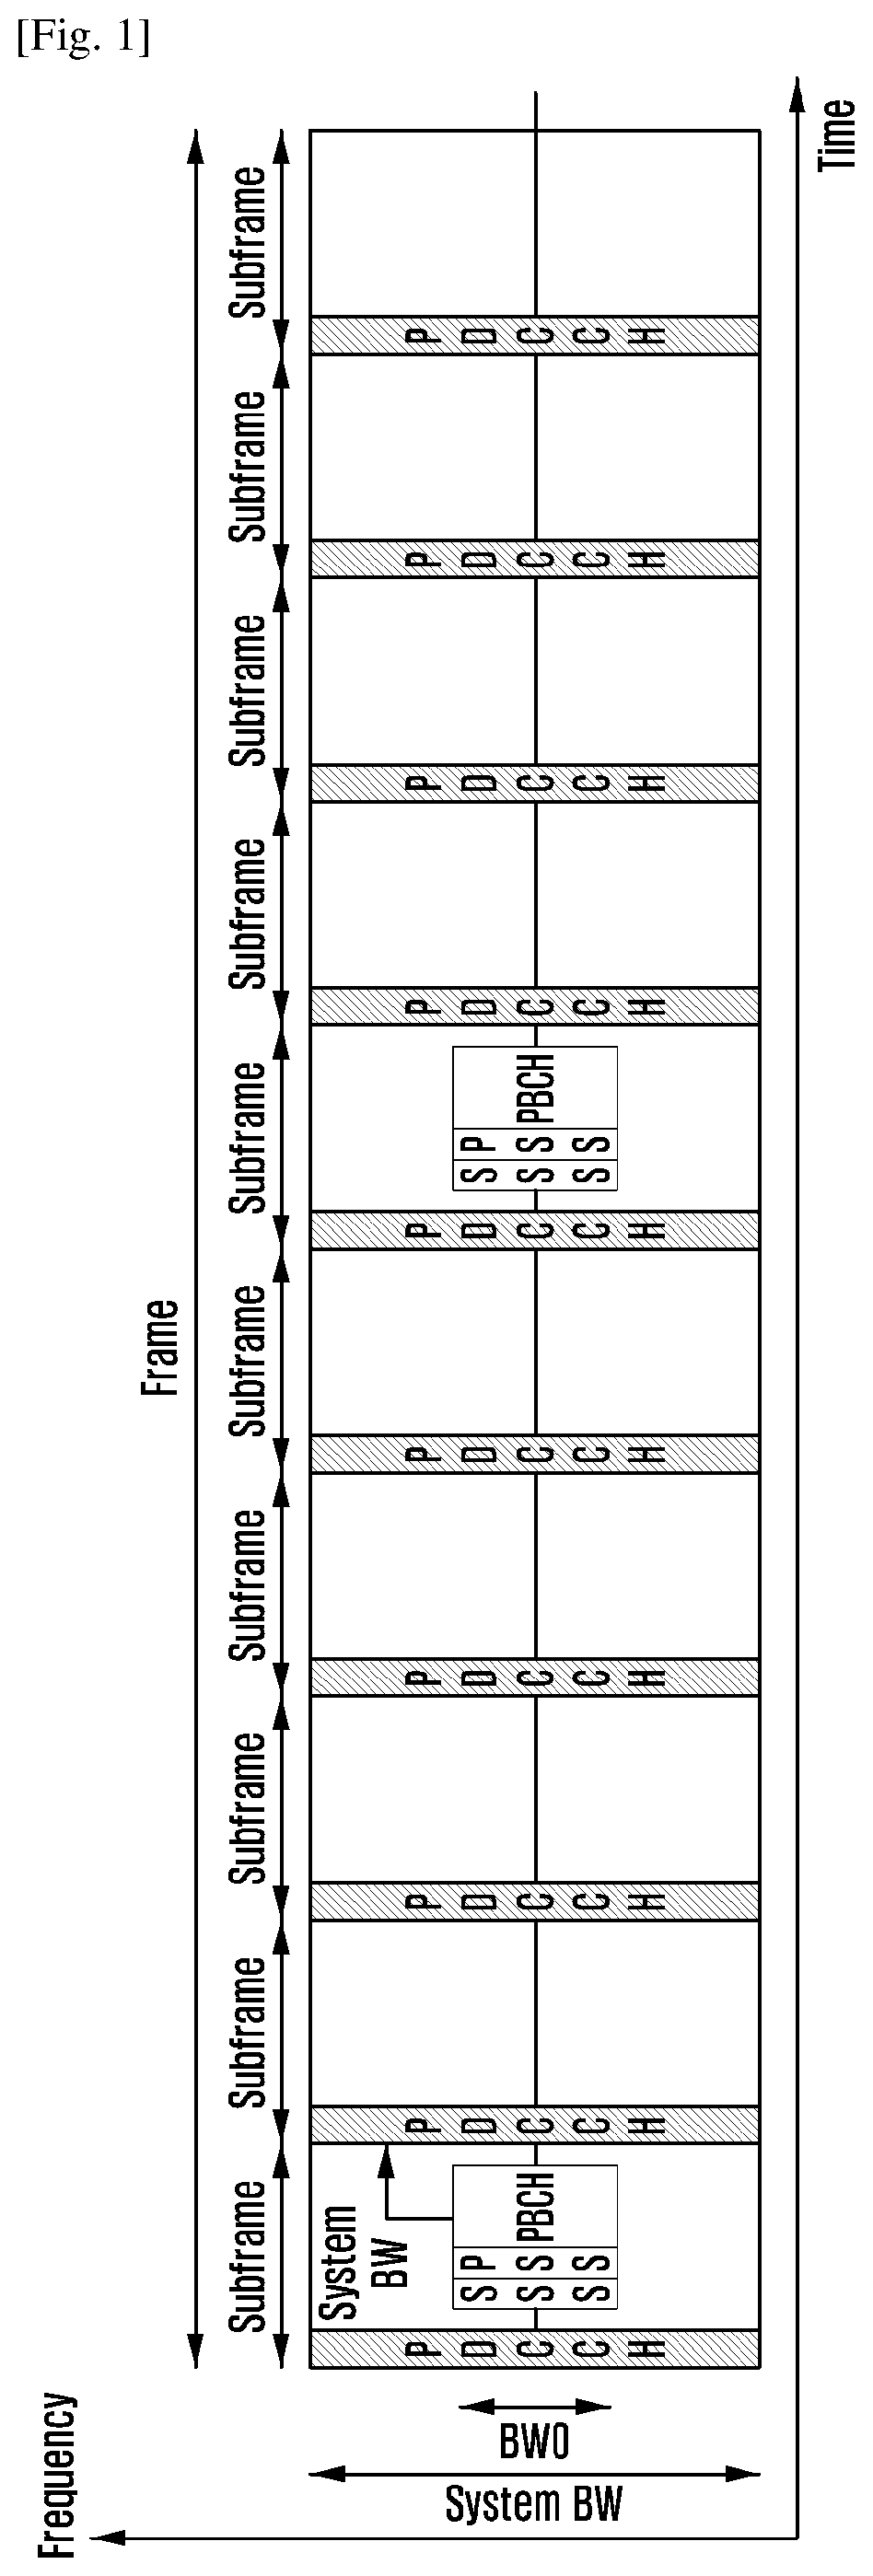 Method and apparatus of initial access in next generation cellular networks